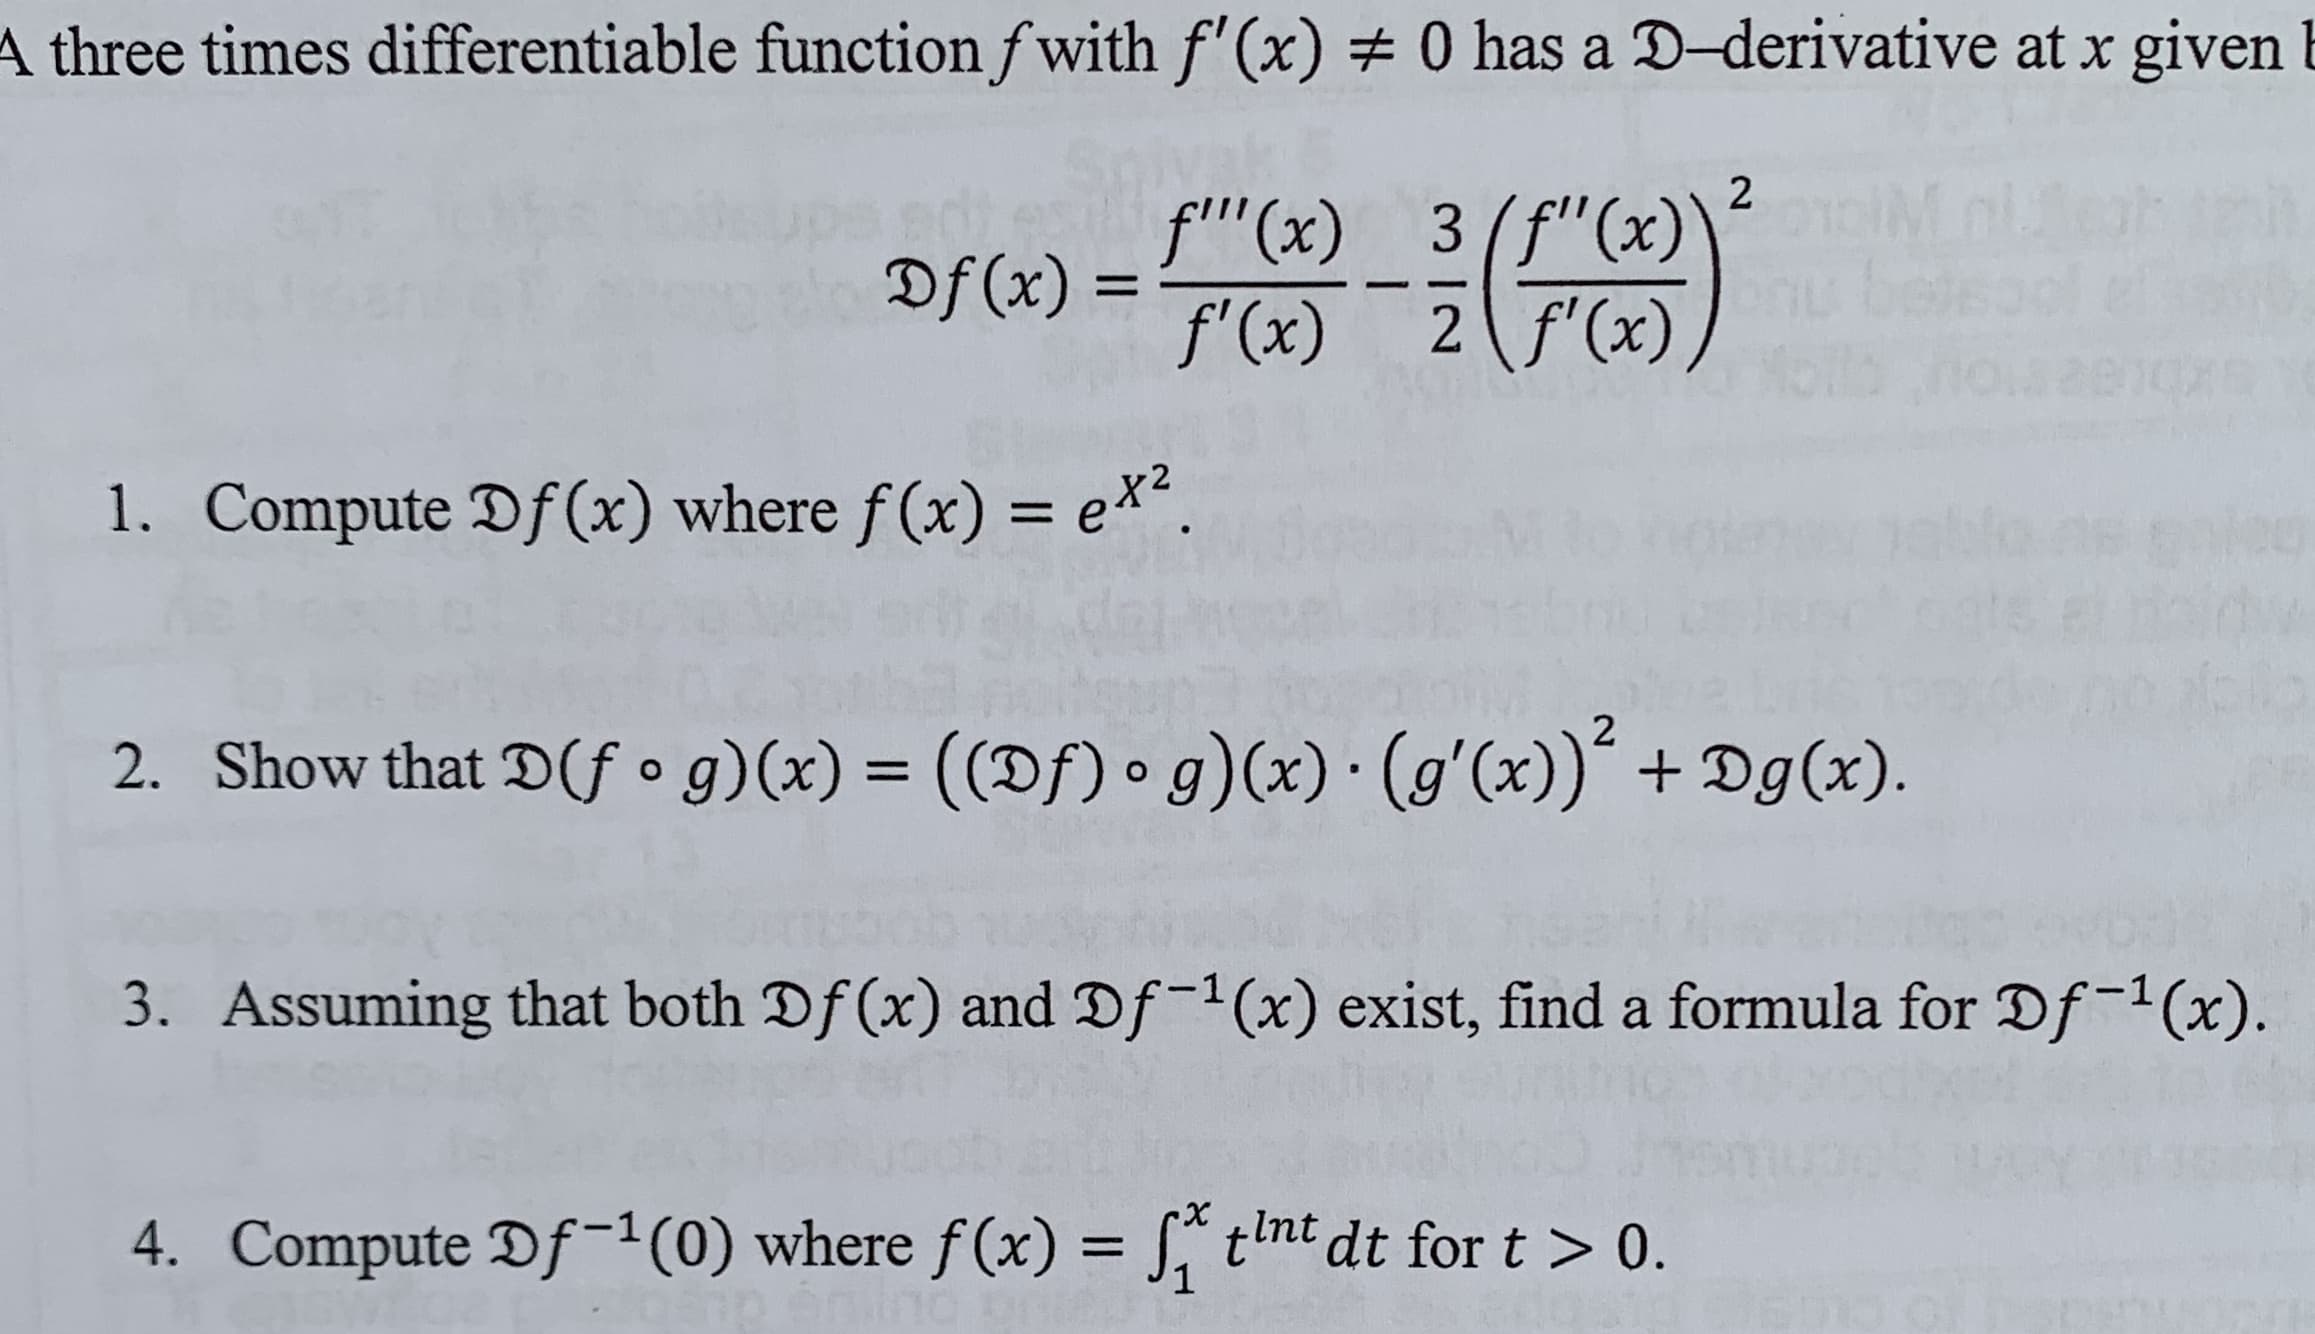 A three times differentiable function fwith f'(x) 0 has a D-derivative at x given
2
f'"(x) 3(f"(x)
Df(x)=(x) 2 f(x),
1. Compute Df(x) where f(x) = ex.
2
2. Show that D(f o g)(x) ((Df) g)(x) (g'(x))Dg(x)
-
Assuming that both Df(x) and Df-1(x) exist, find a formula for Df-1(x)
3.
X
tnt dt for t > 0.
4. Compute Df-1 (0) where f(x) =
1
